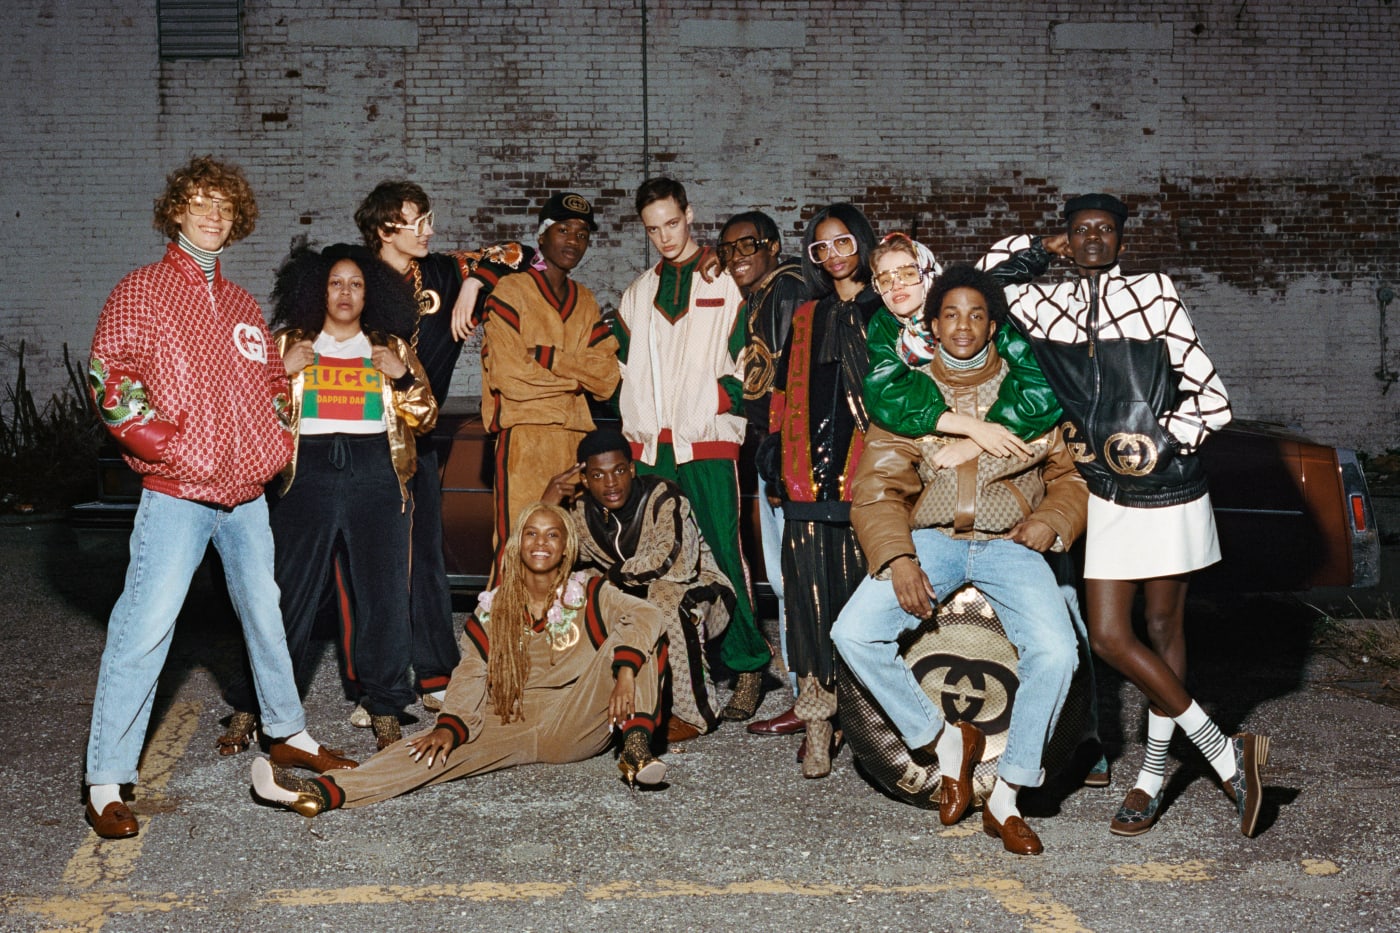 Gucci: How Desirable Is the Brand After Its Blackface Controversy? Complex